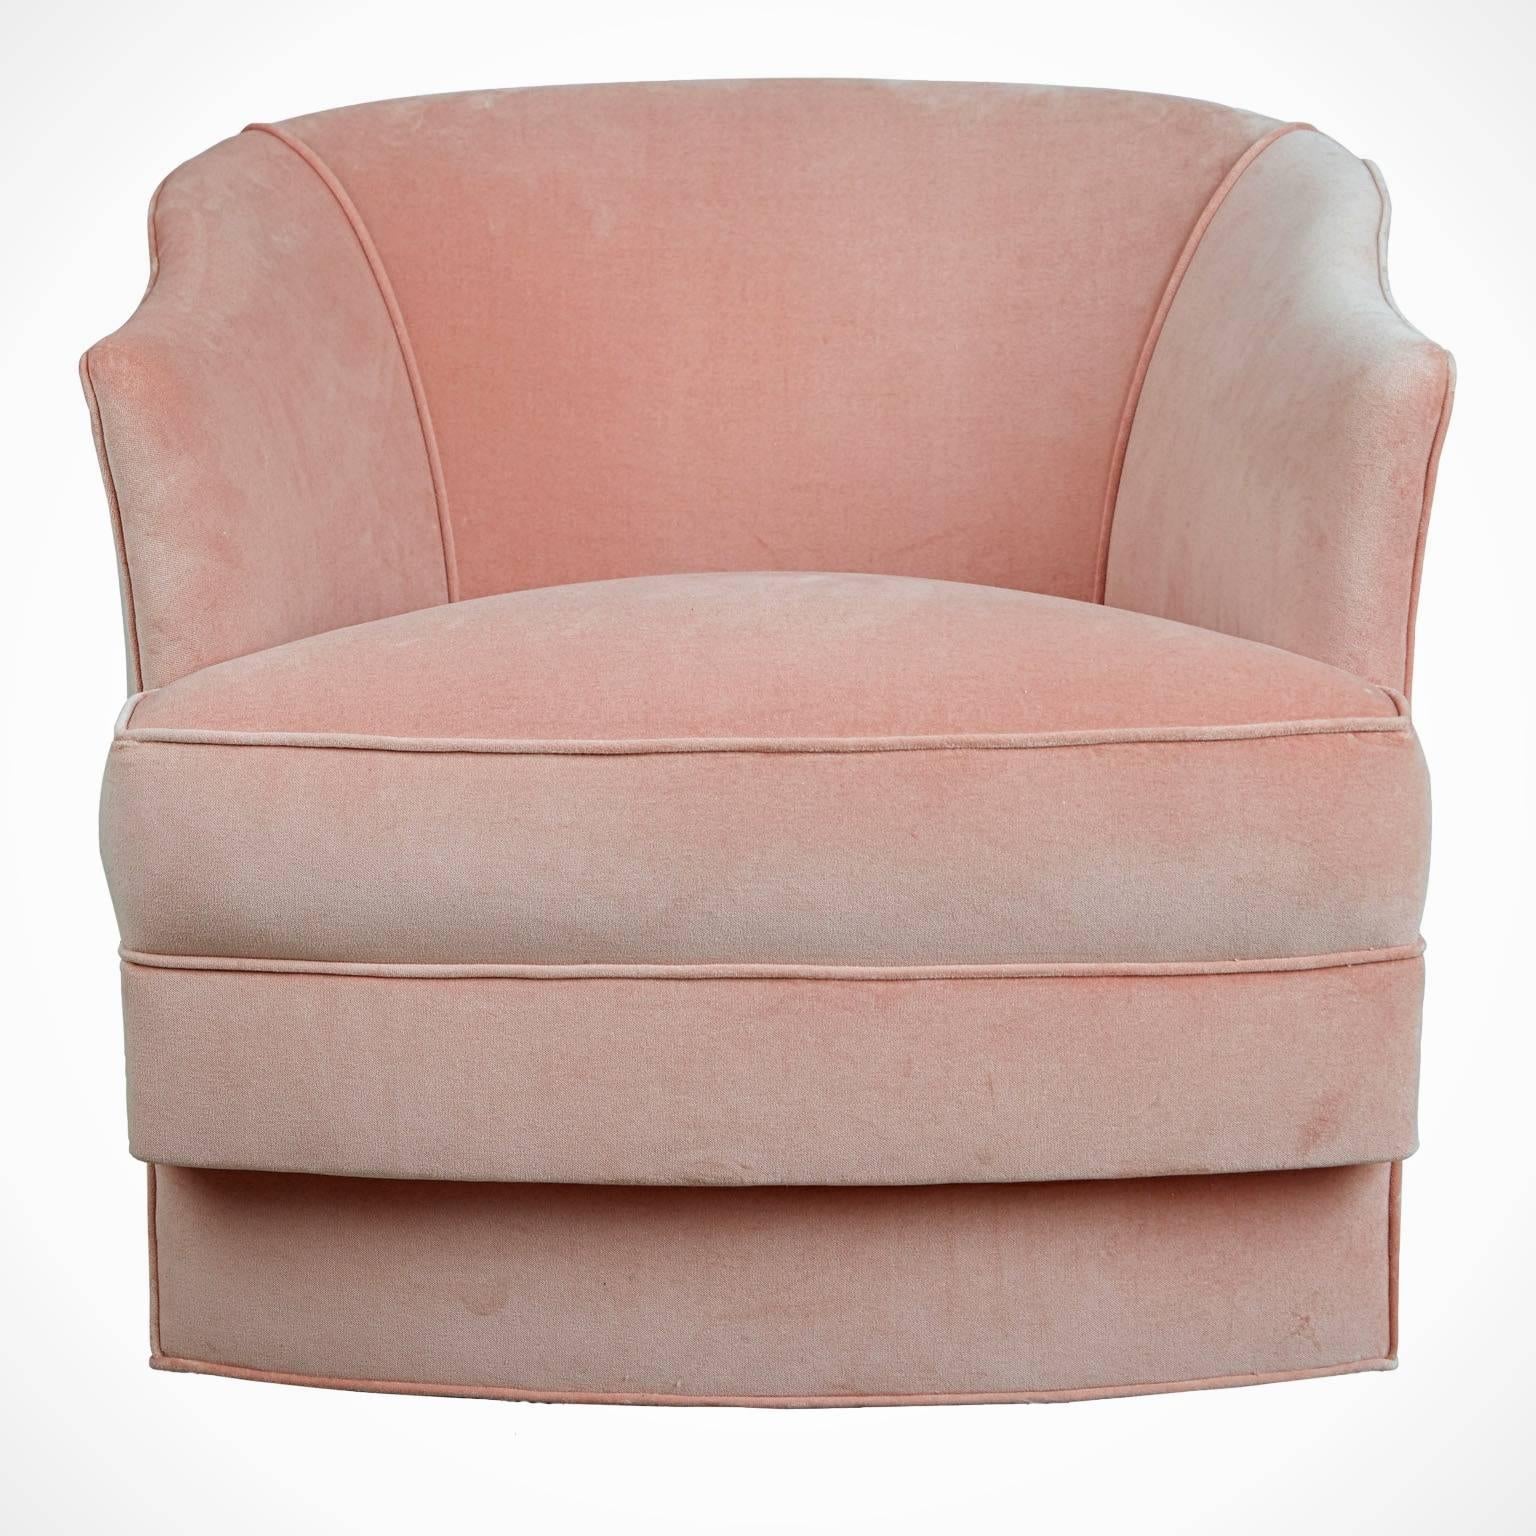 Sumptuous set of four swivel tub chairs by John Stuart. Newly upholstered in a cotton velvet in a delicate shade of pink coral and set on moveable casters for ease of relocation and use. They would look wonderful paired with a Lucite or marble